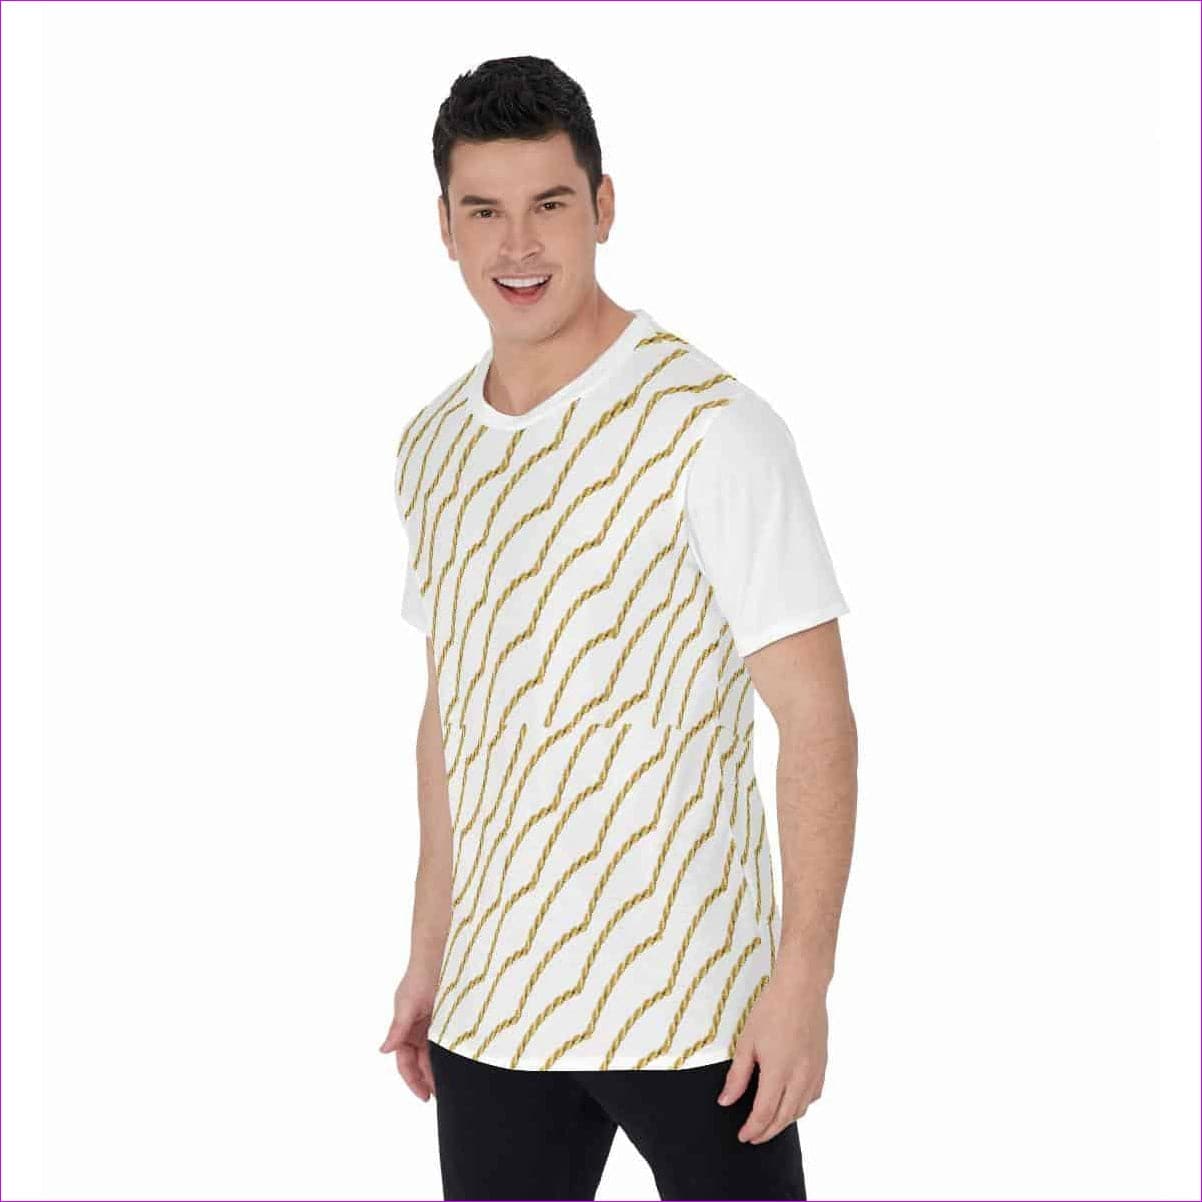 Chained Men's O-Neck T-Shirt - White - Men's T-Shirts at TFC&H Co.